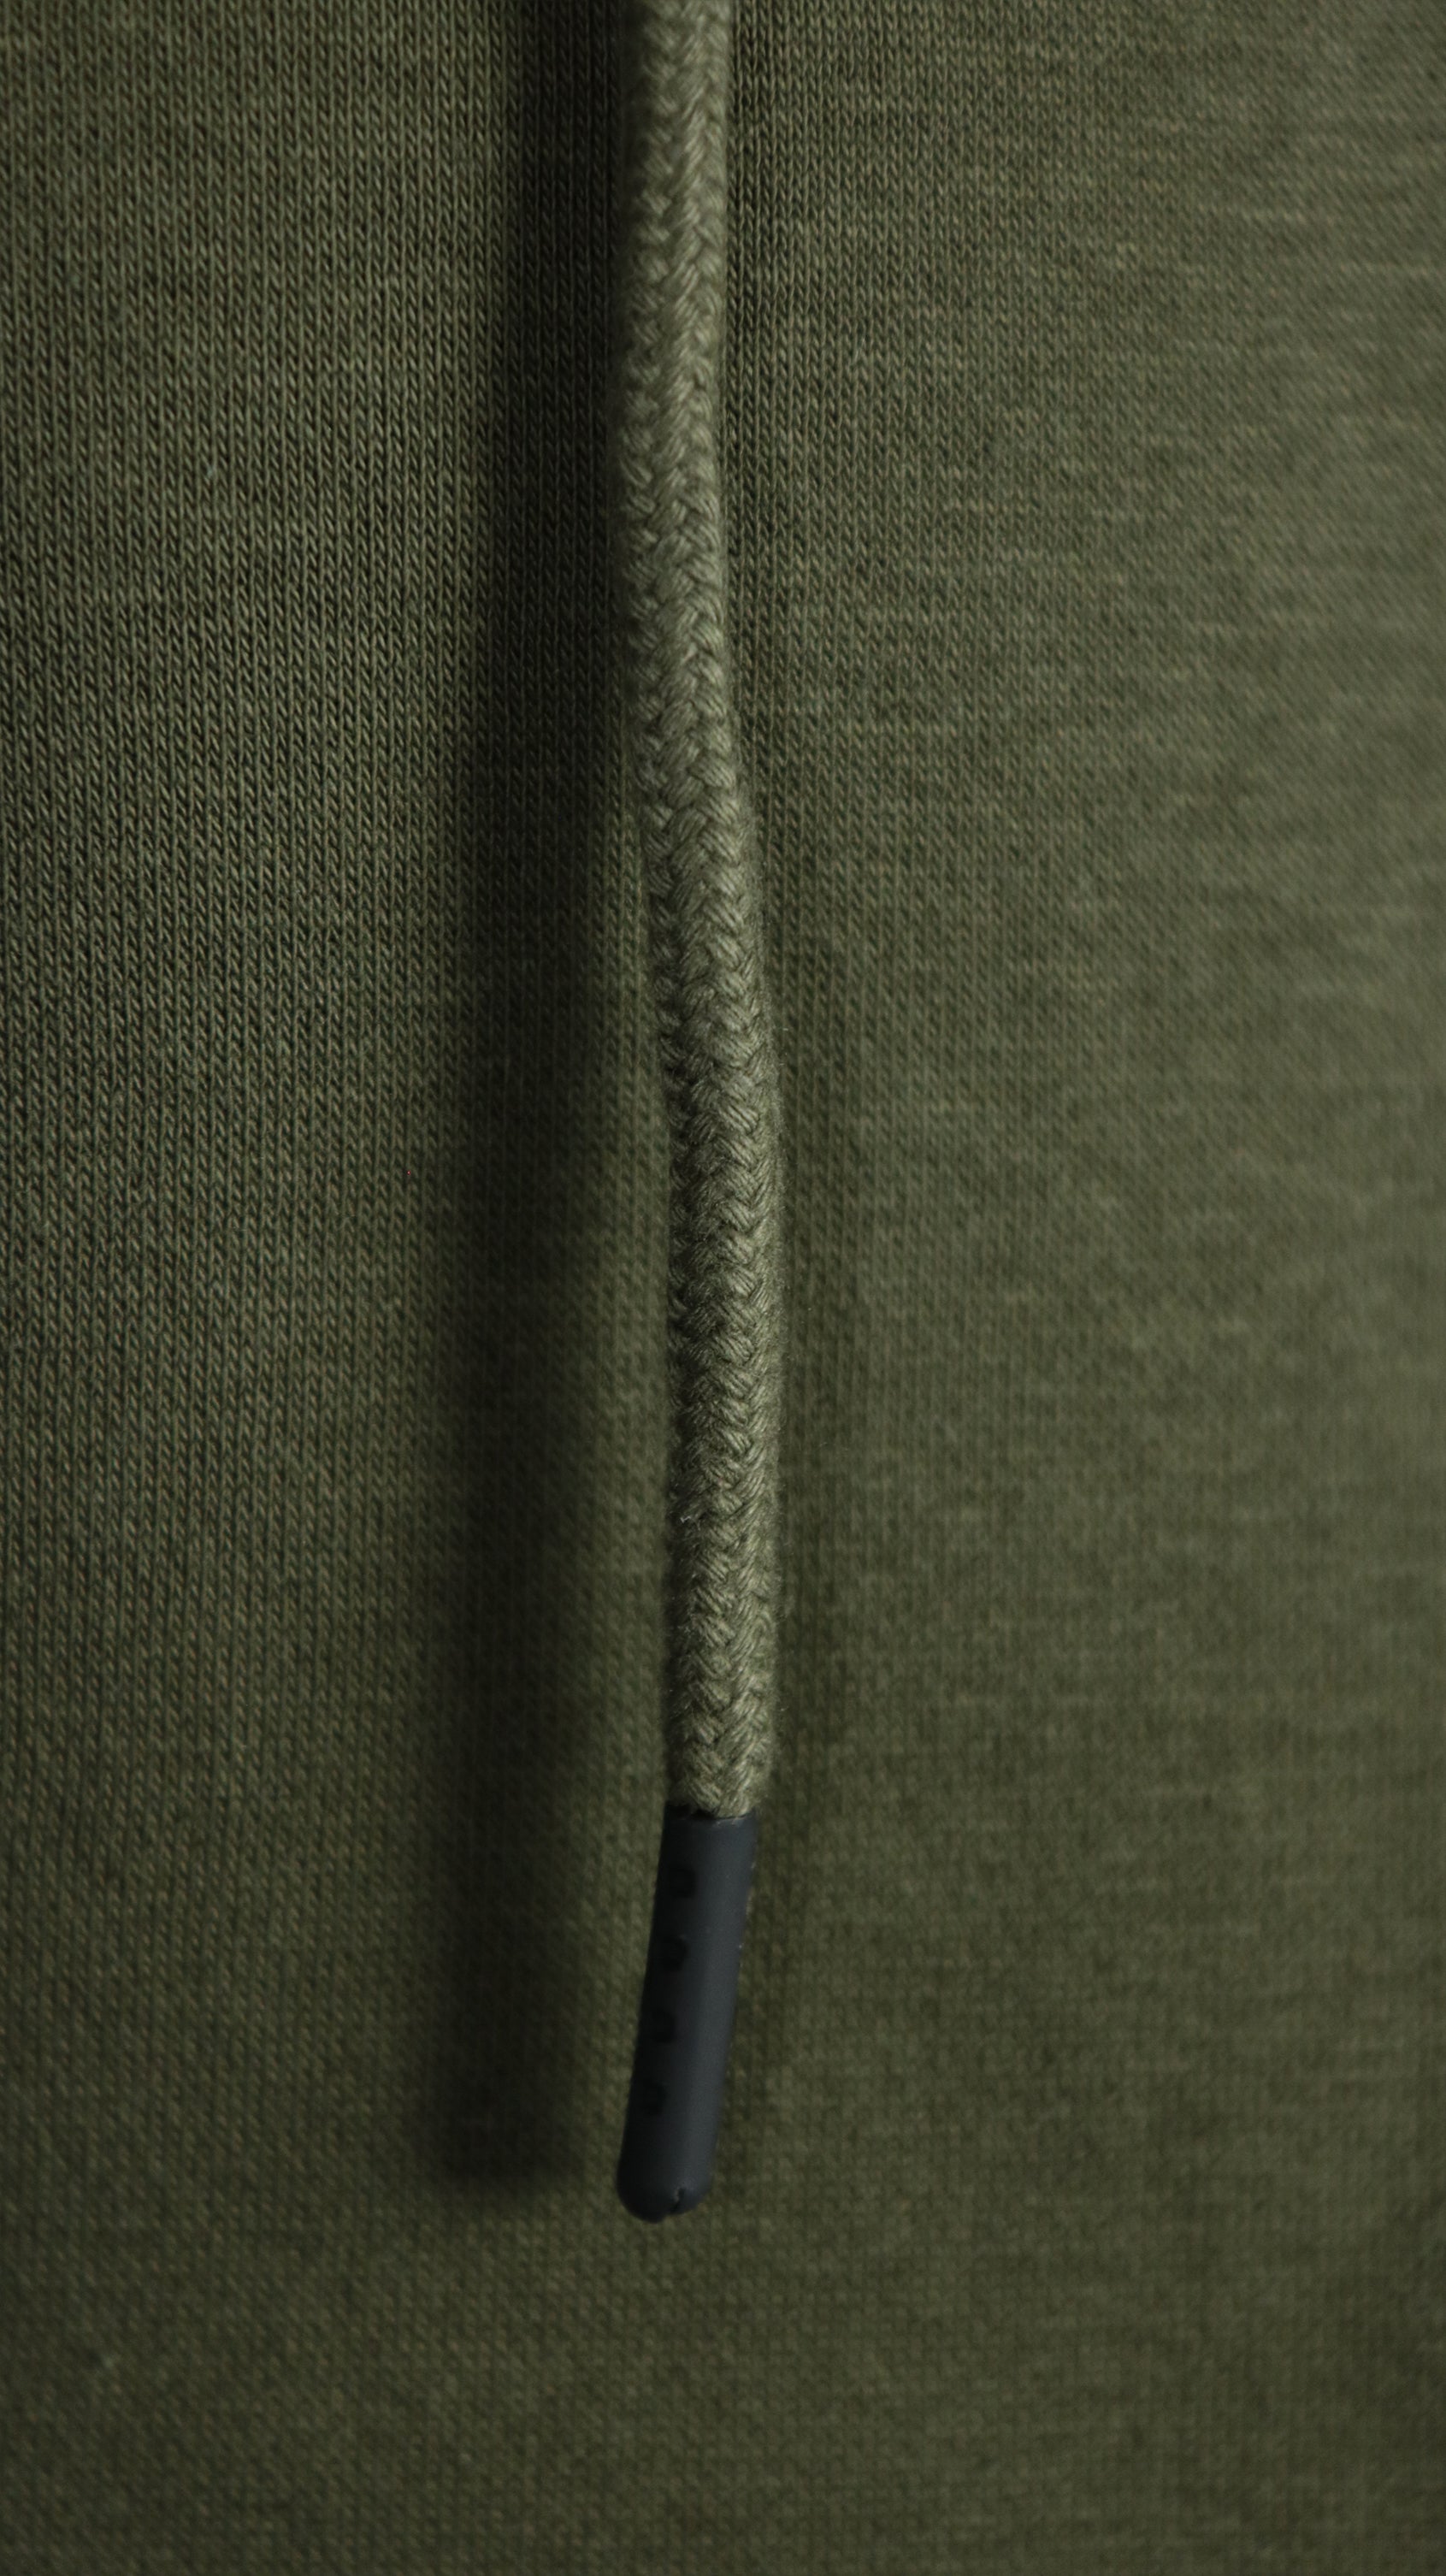 The drawstring of the military olive green zipup hoodie by Jordan Craig.